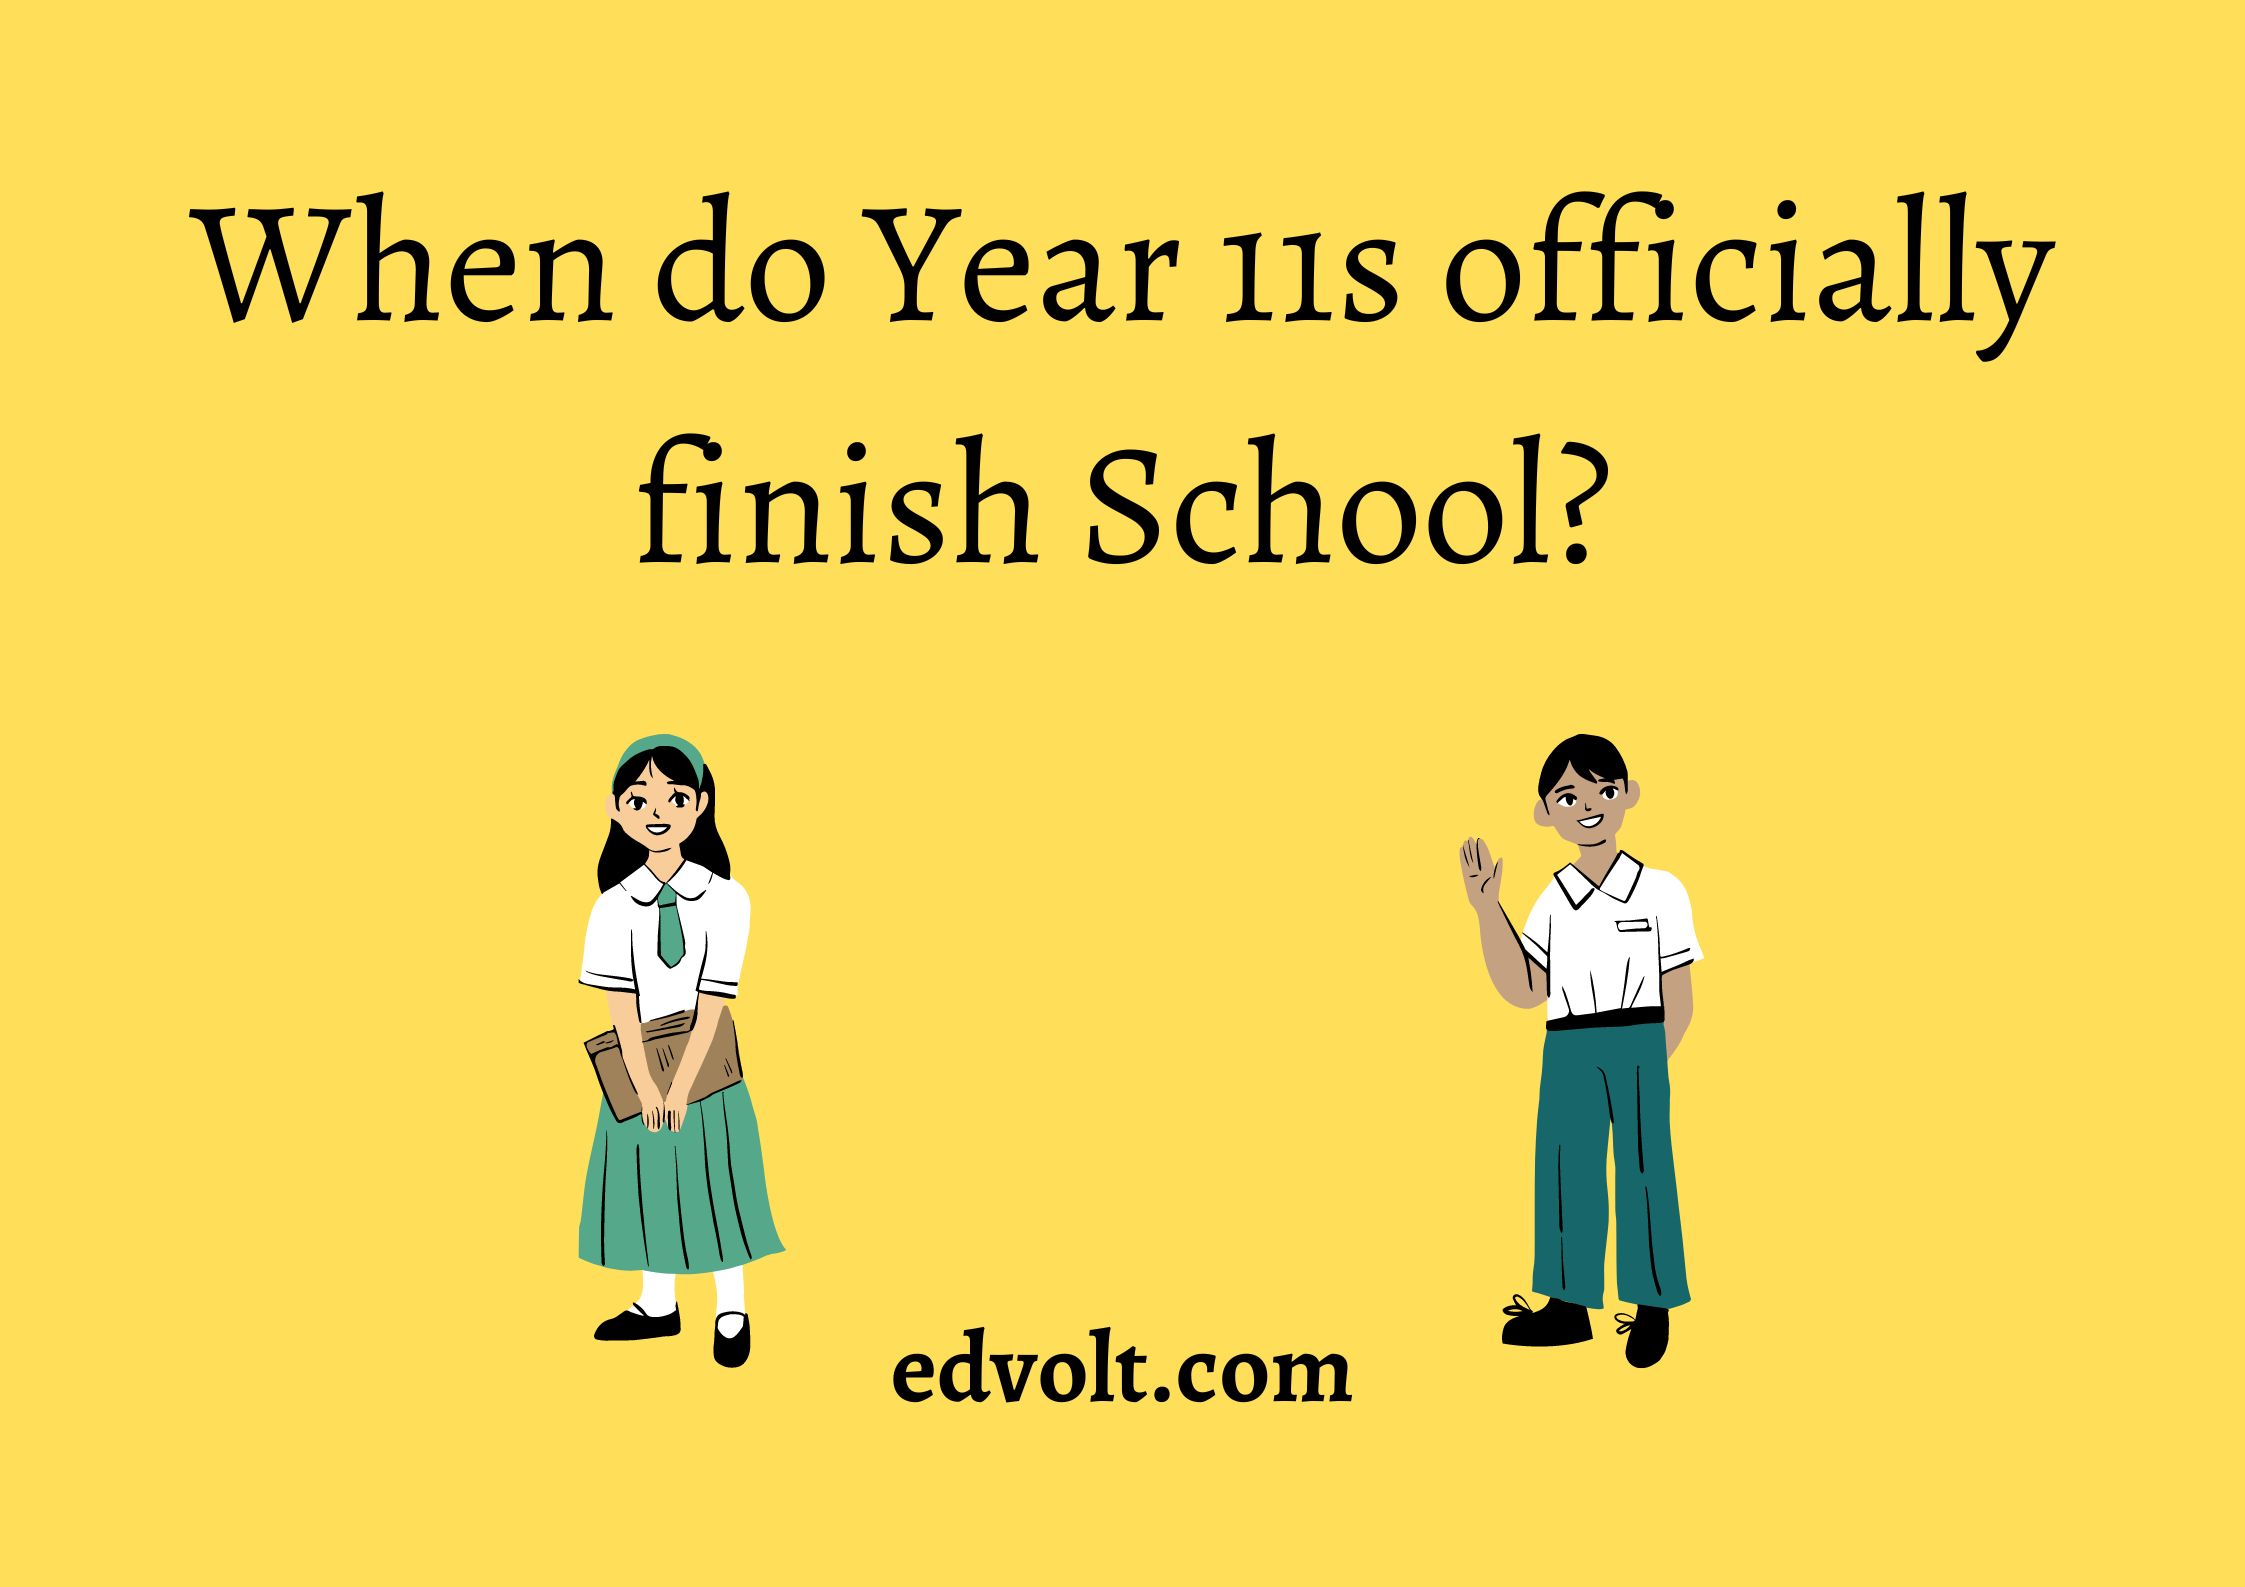 When do Year 11s officially finish School?